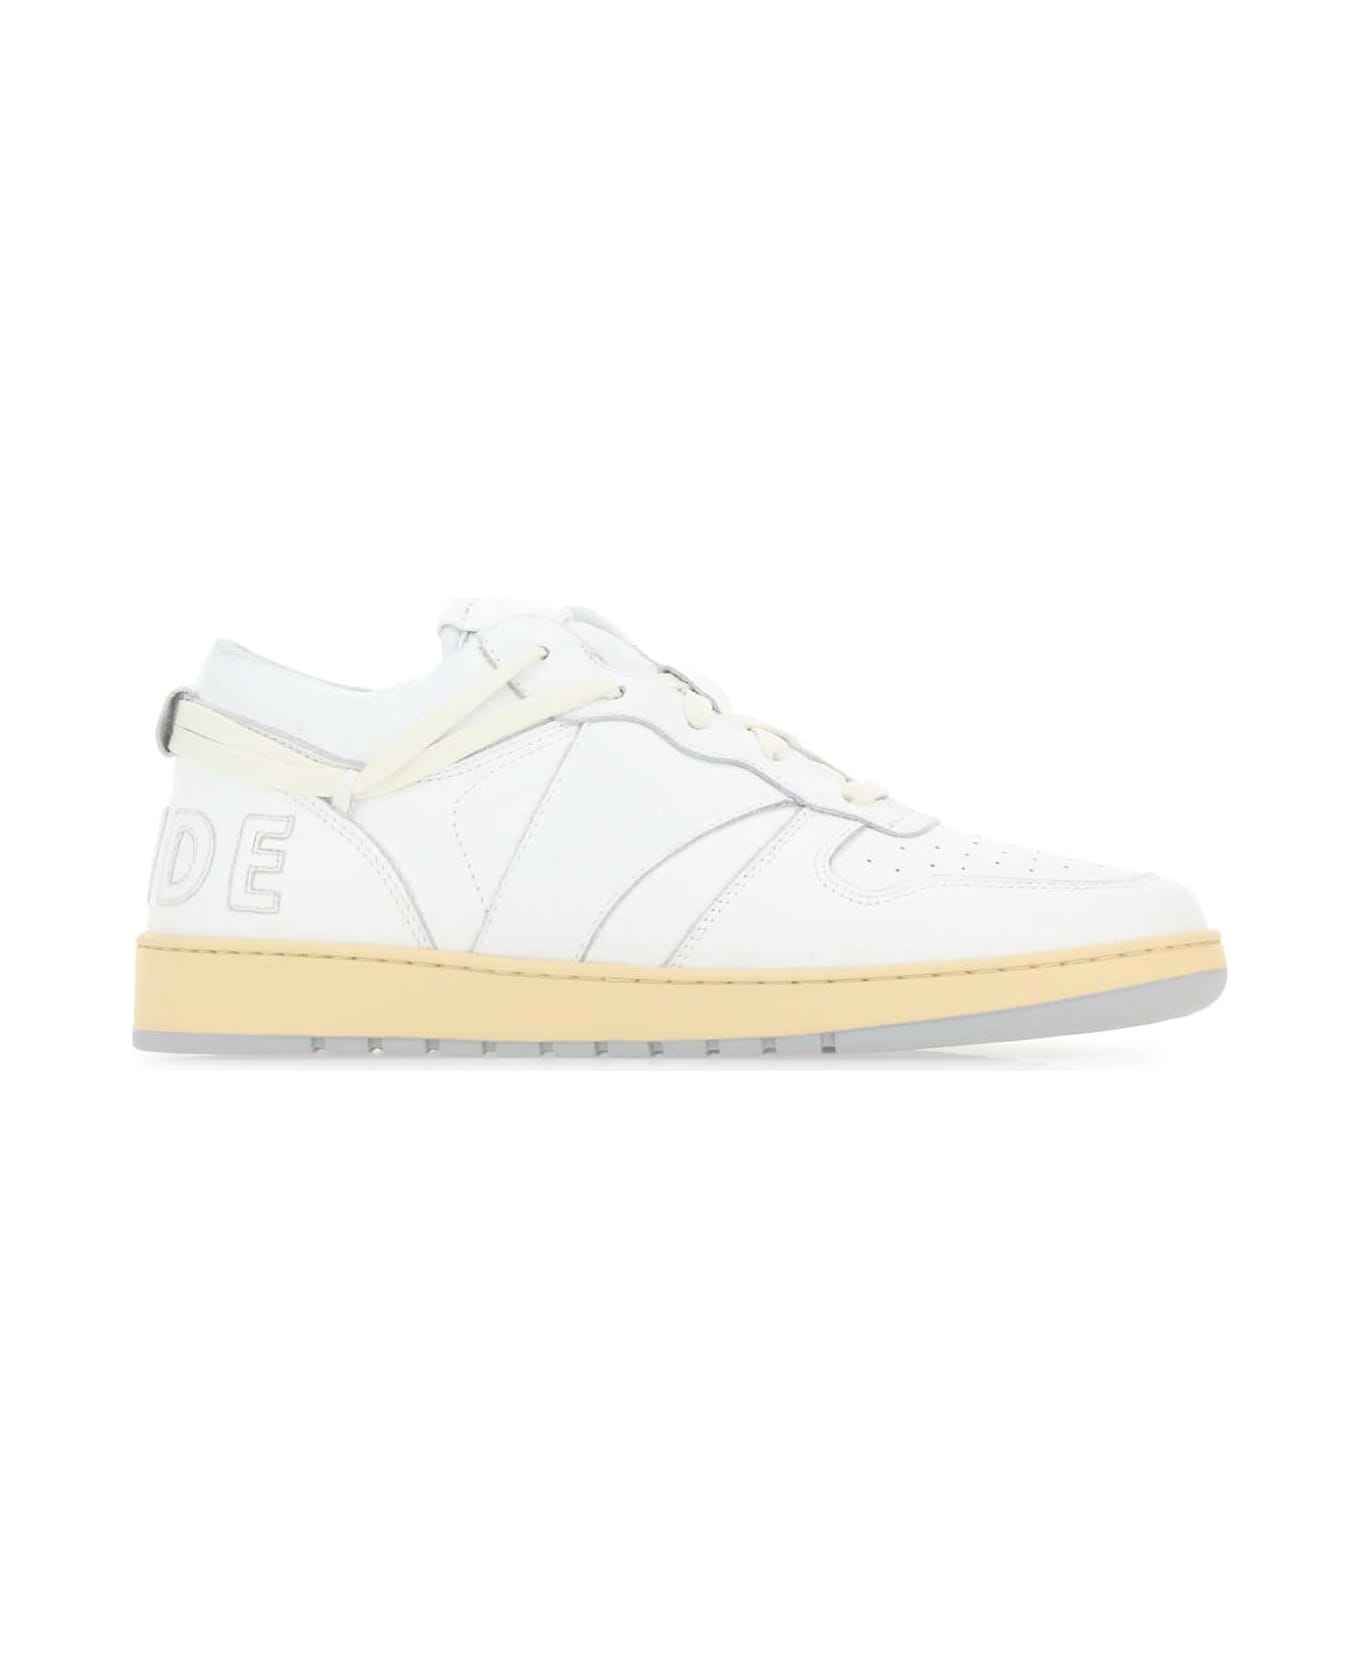 Rhude White Leather Rhecess Sneakers - 0444